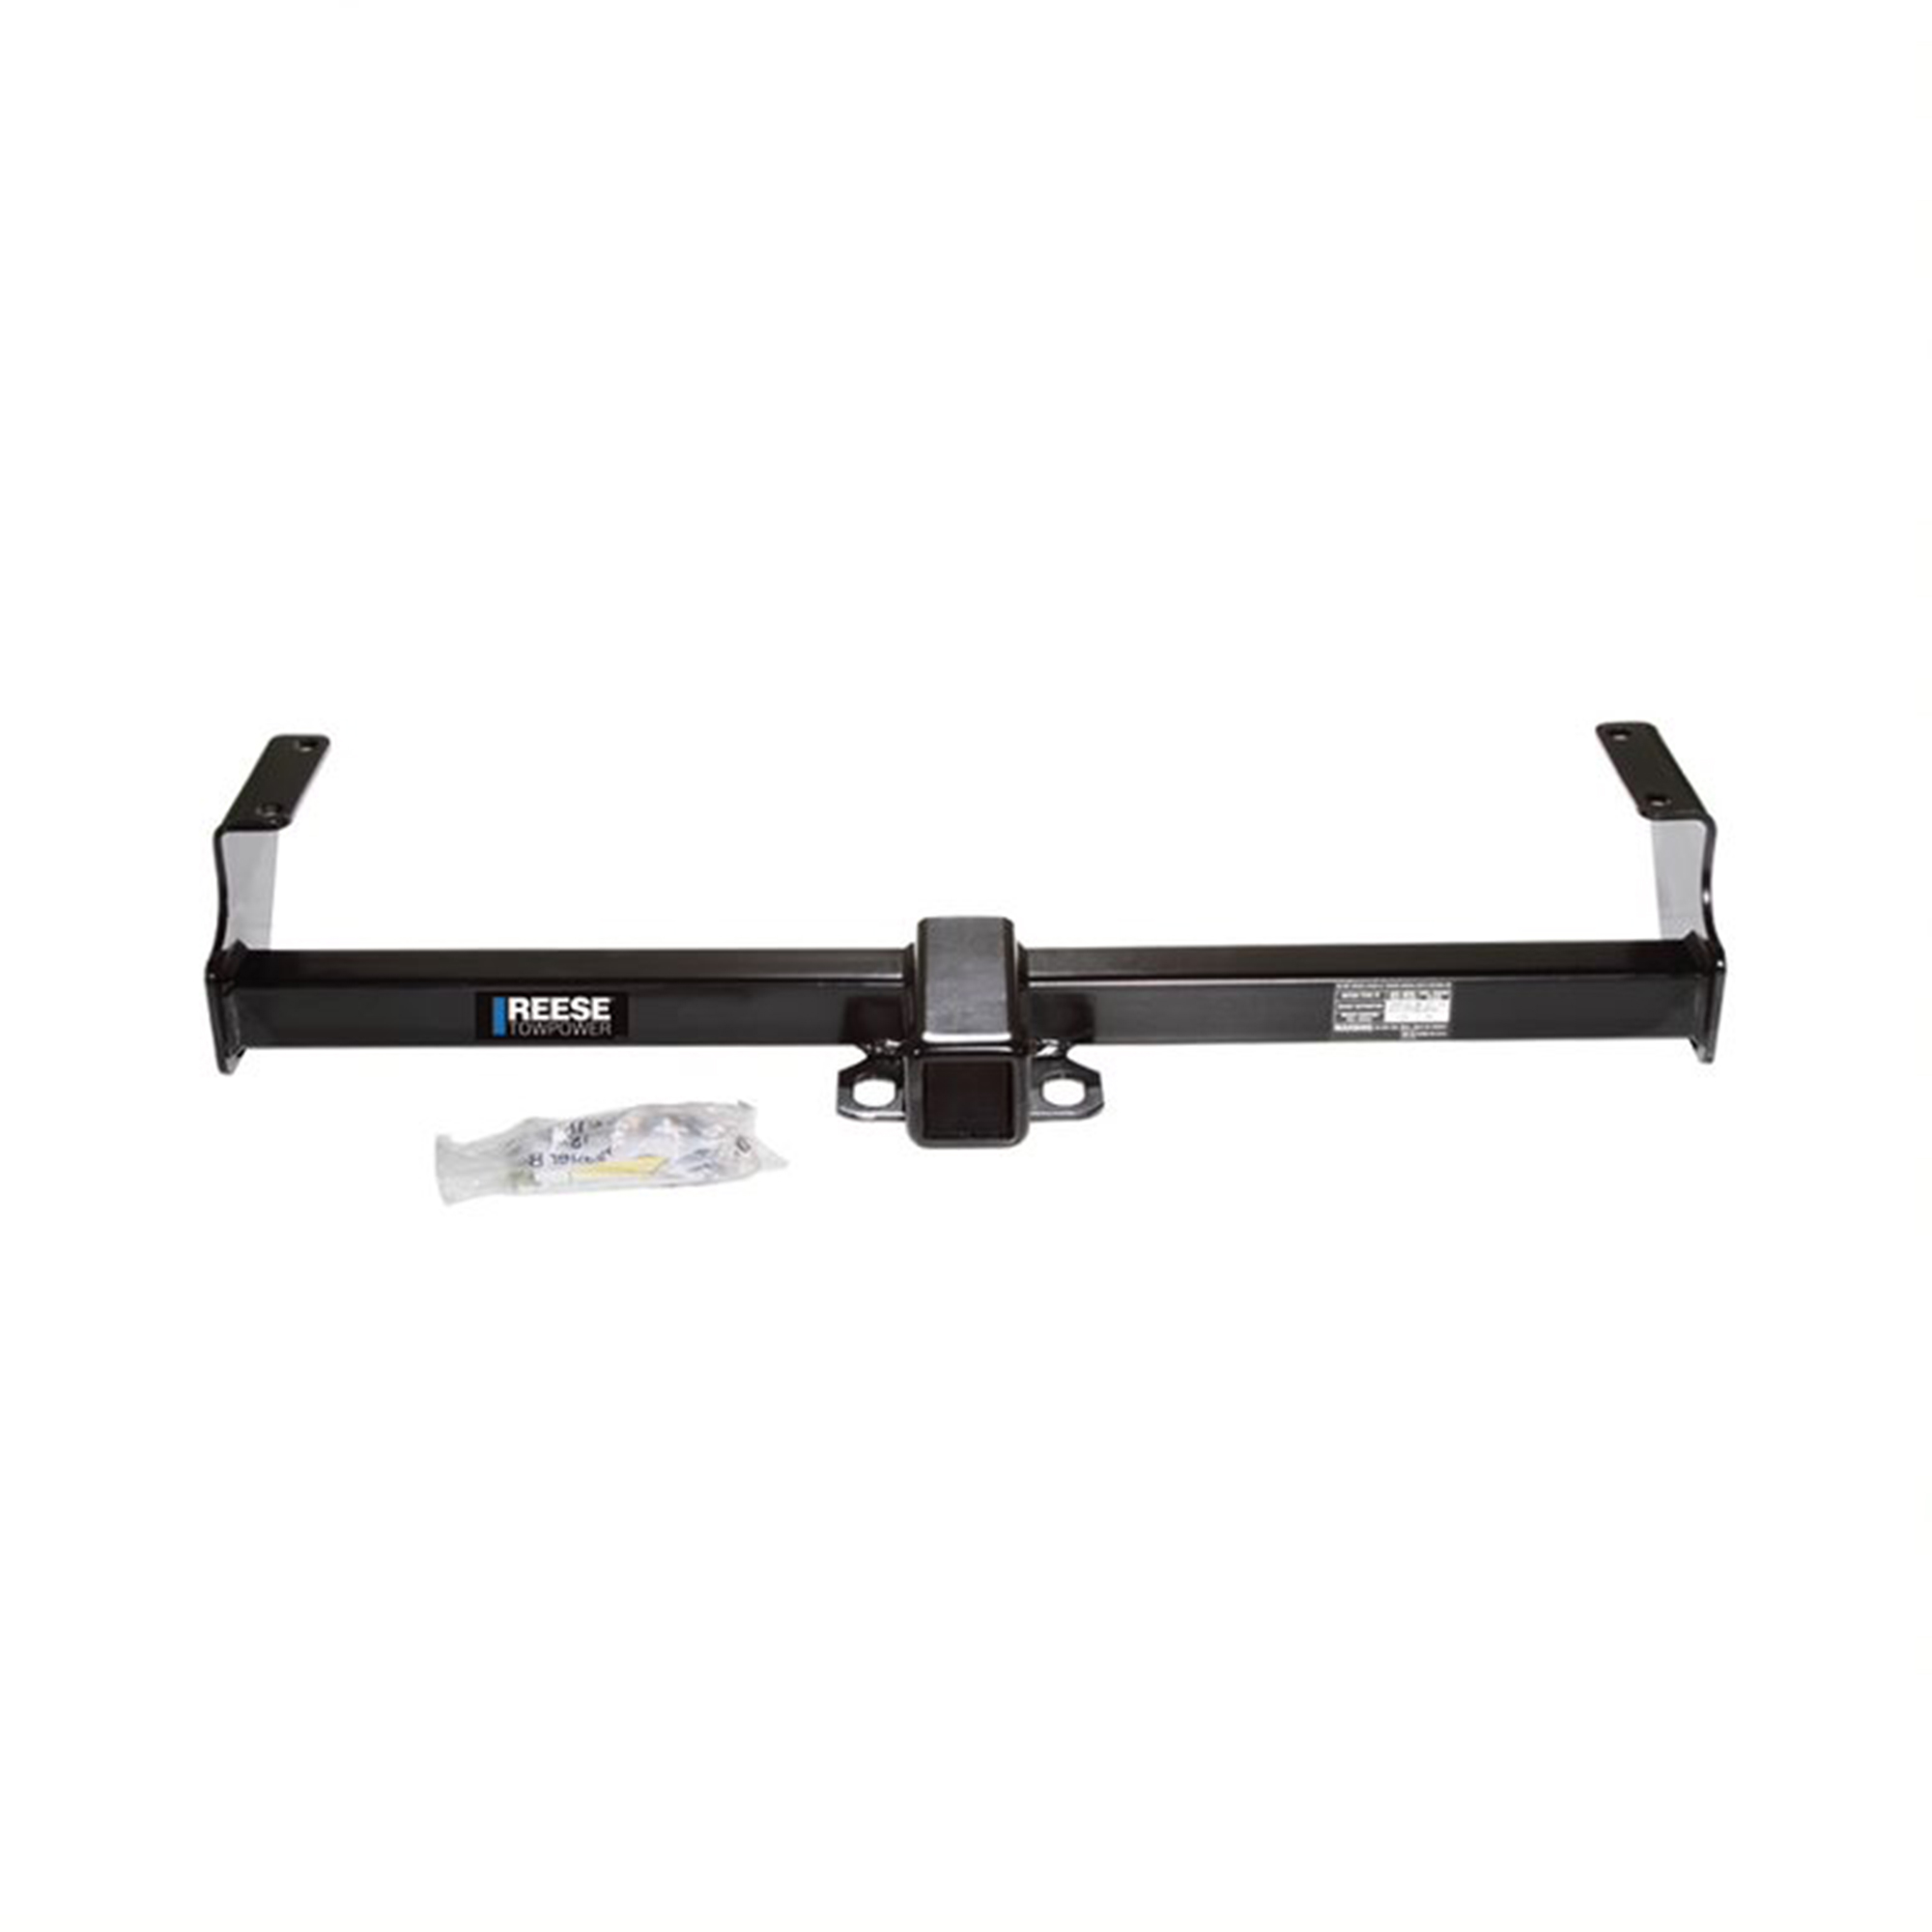 Reese Towpower Class III Max Frame Trailer Tow Hitch w/ 2 In Receiver Tube - image 2 of 9